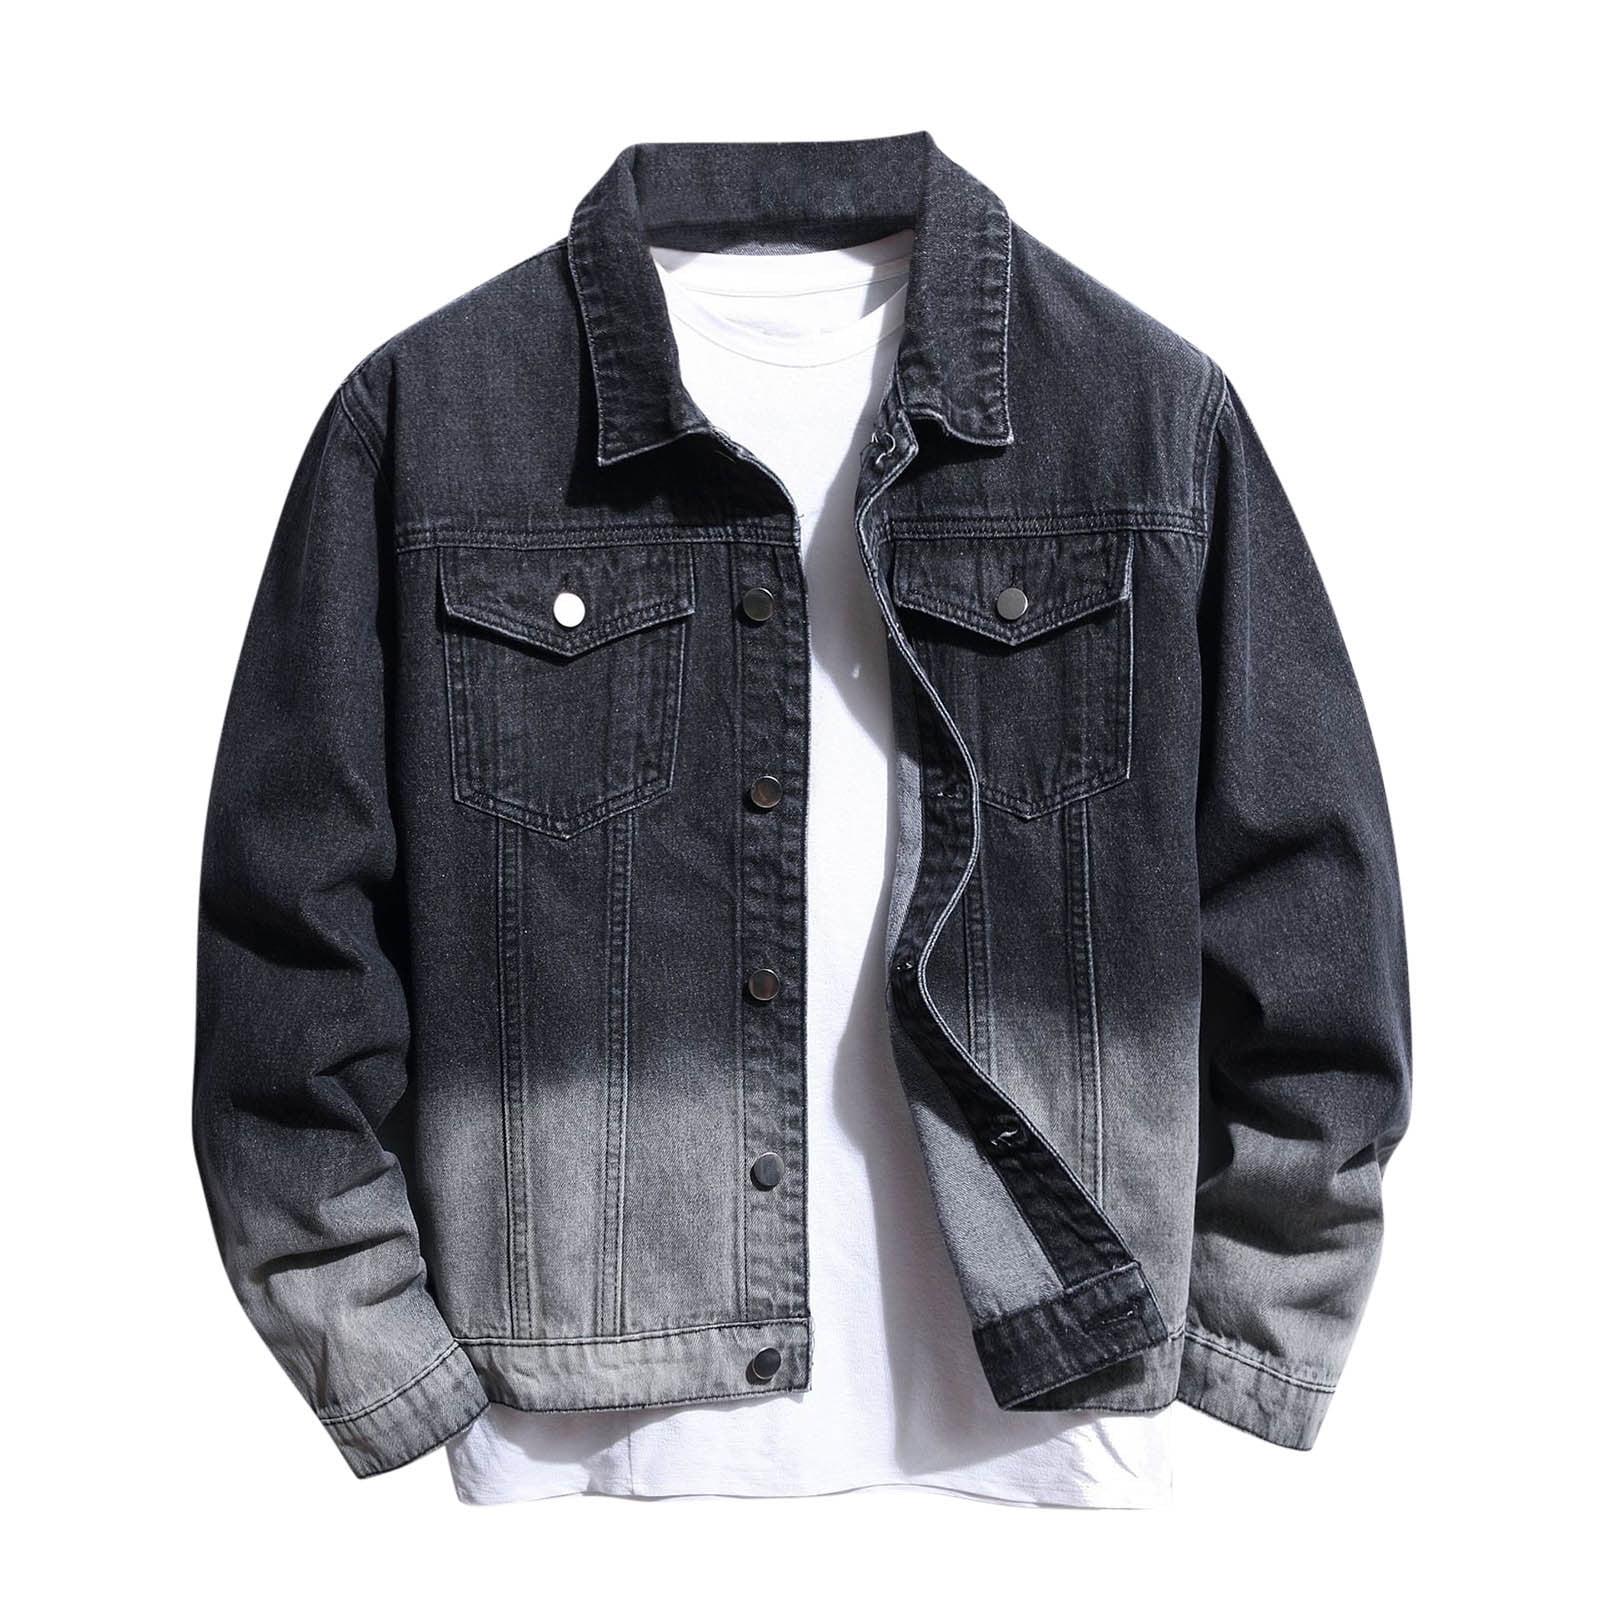 Jean Jacket for Men,Fashion Slim Fit Distressed Ripped Denim Jackets Casual  Classic Trucker Outwear Coat with Pockets at Amazon Men's Clothing store